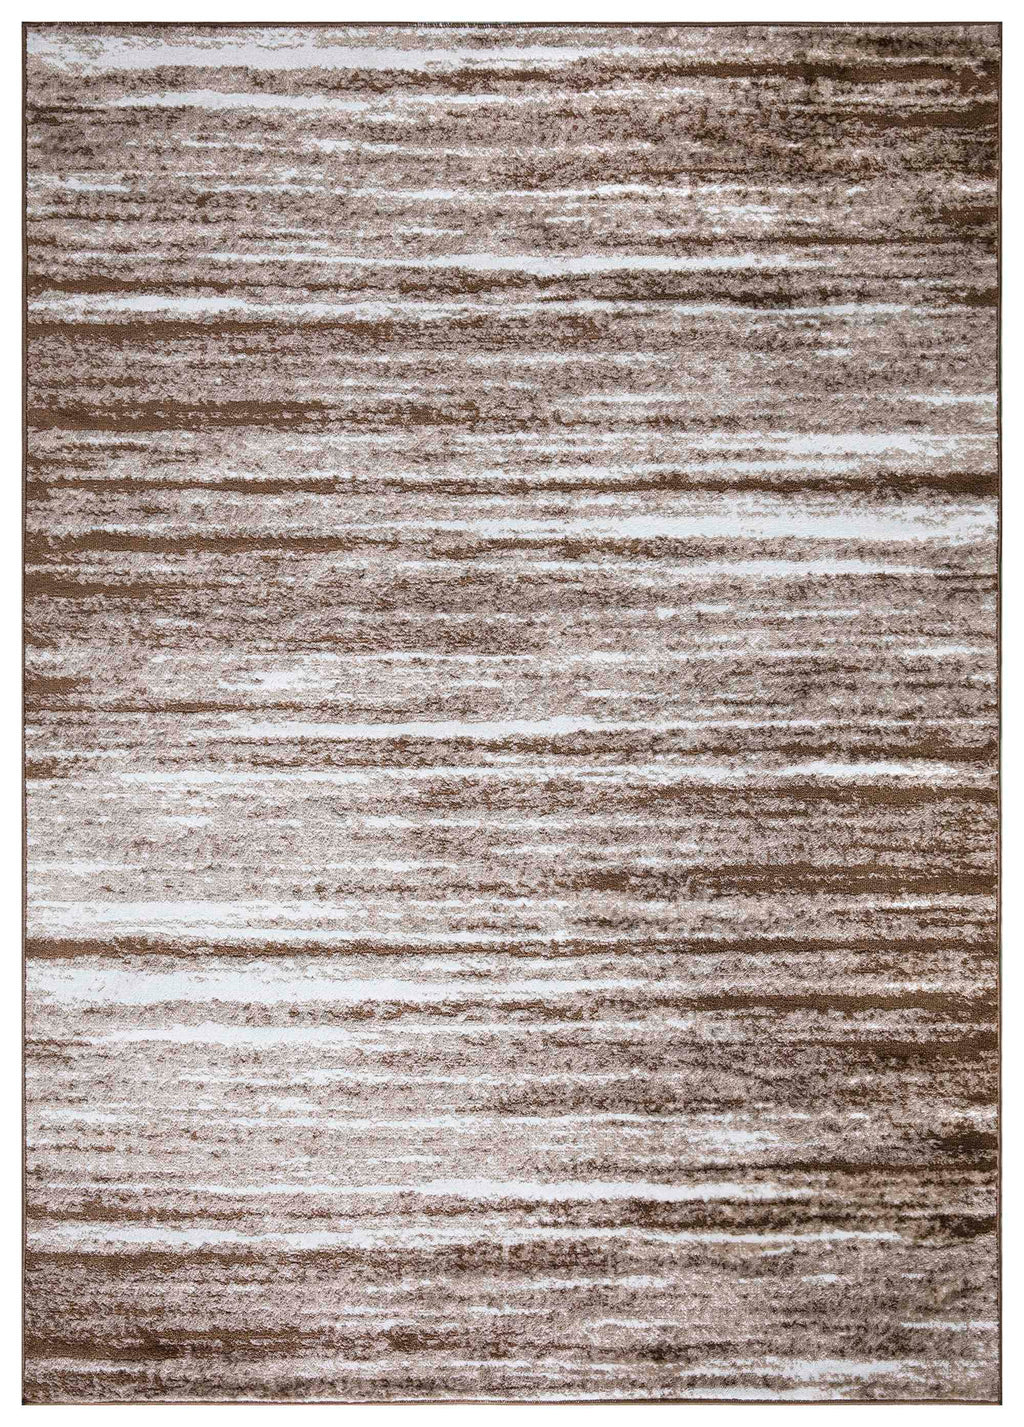 Palma Striped Modern Rug - Brown www.homelooks.com over-view 